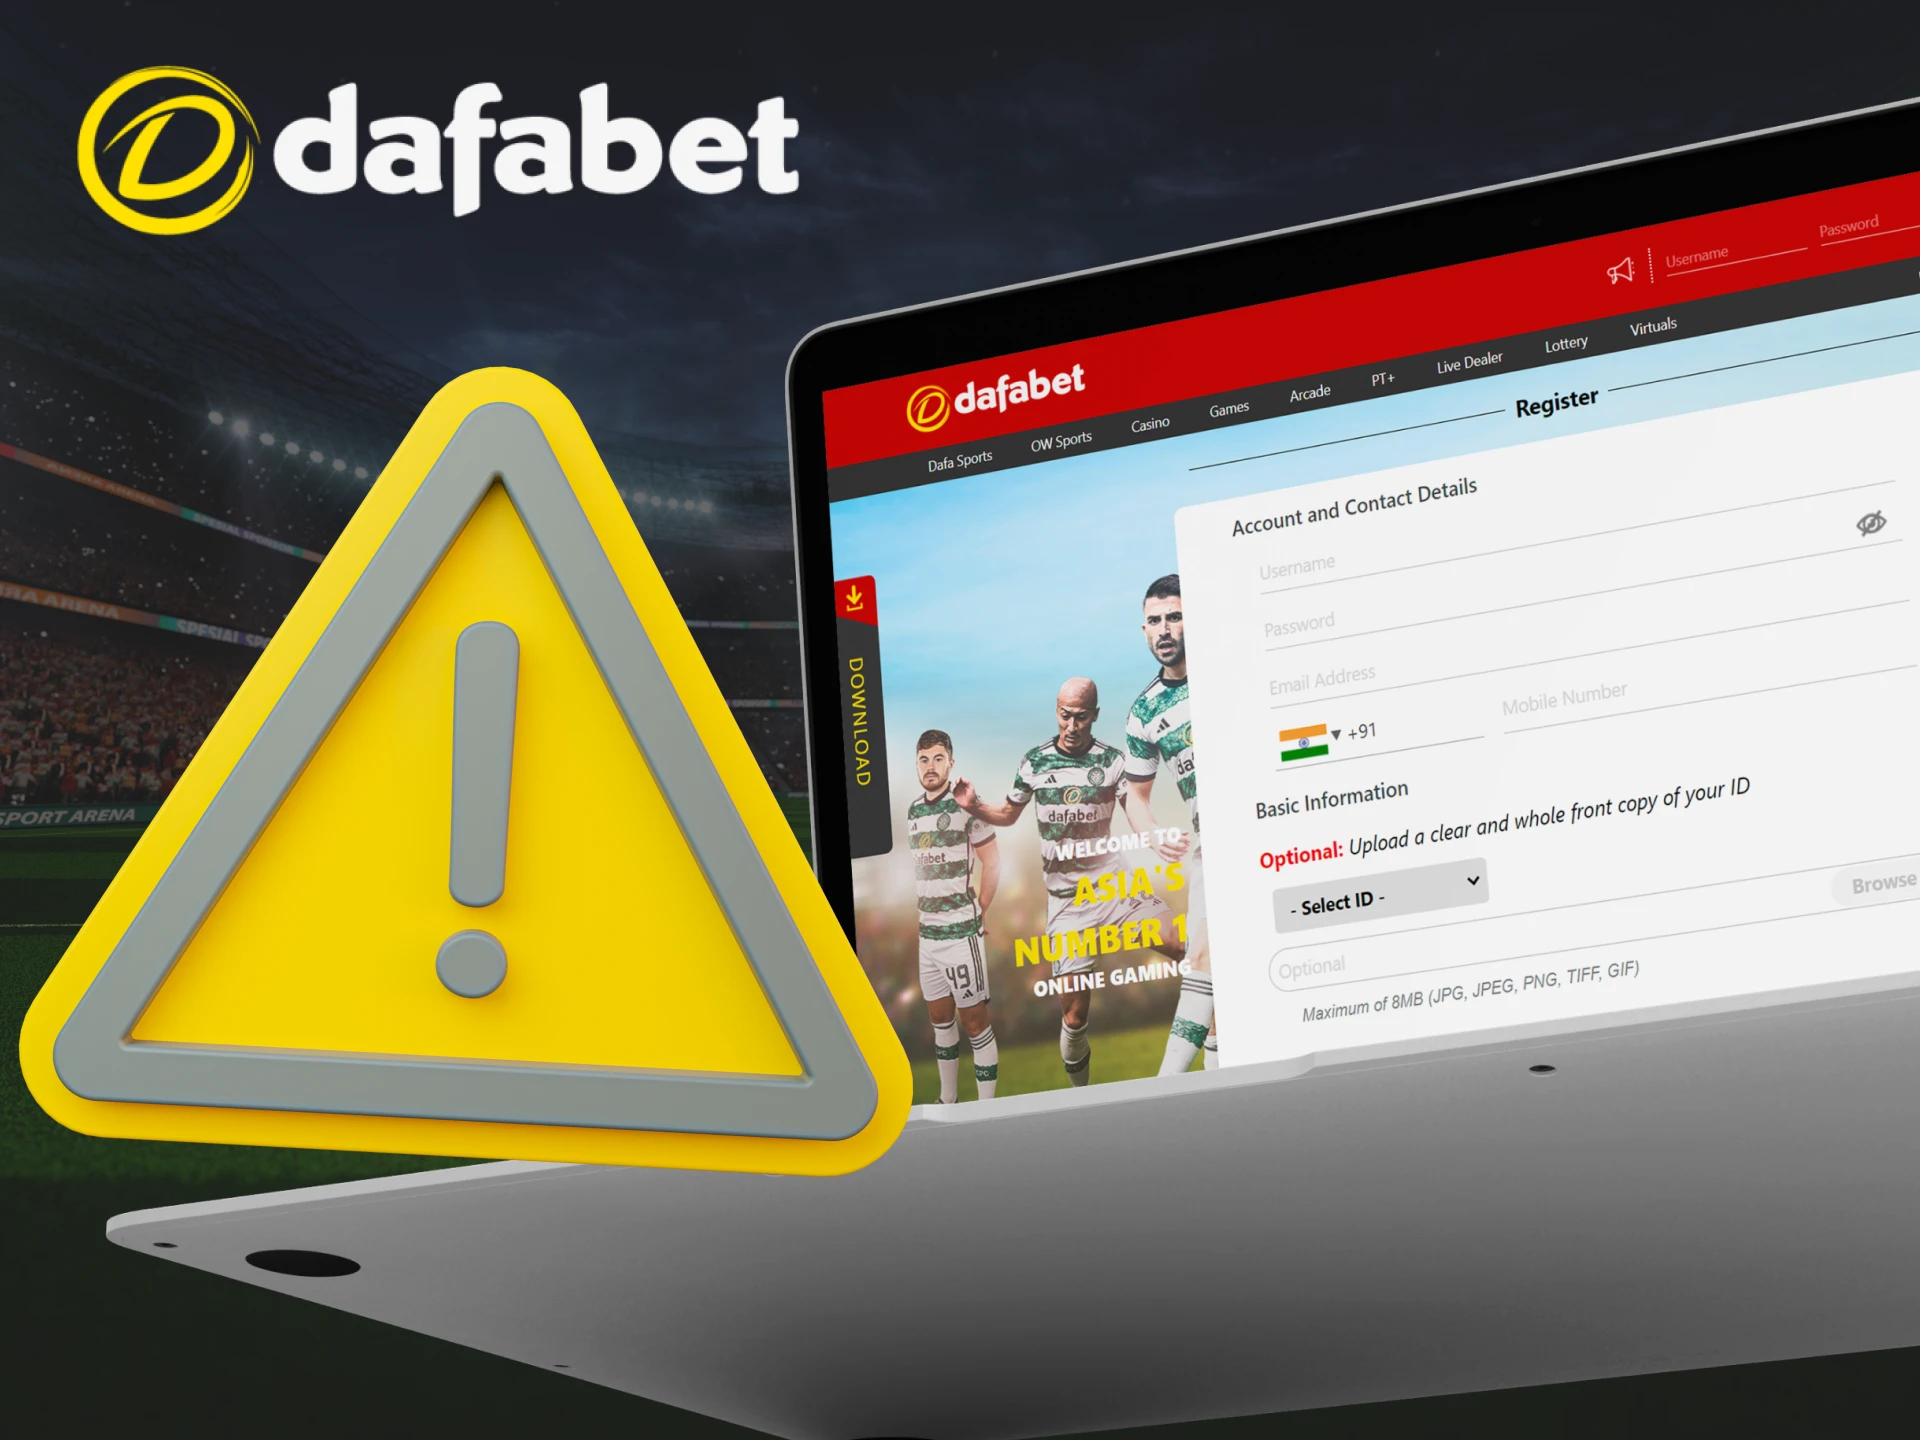 When registering with Dafabet, you may encounter some problems.